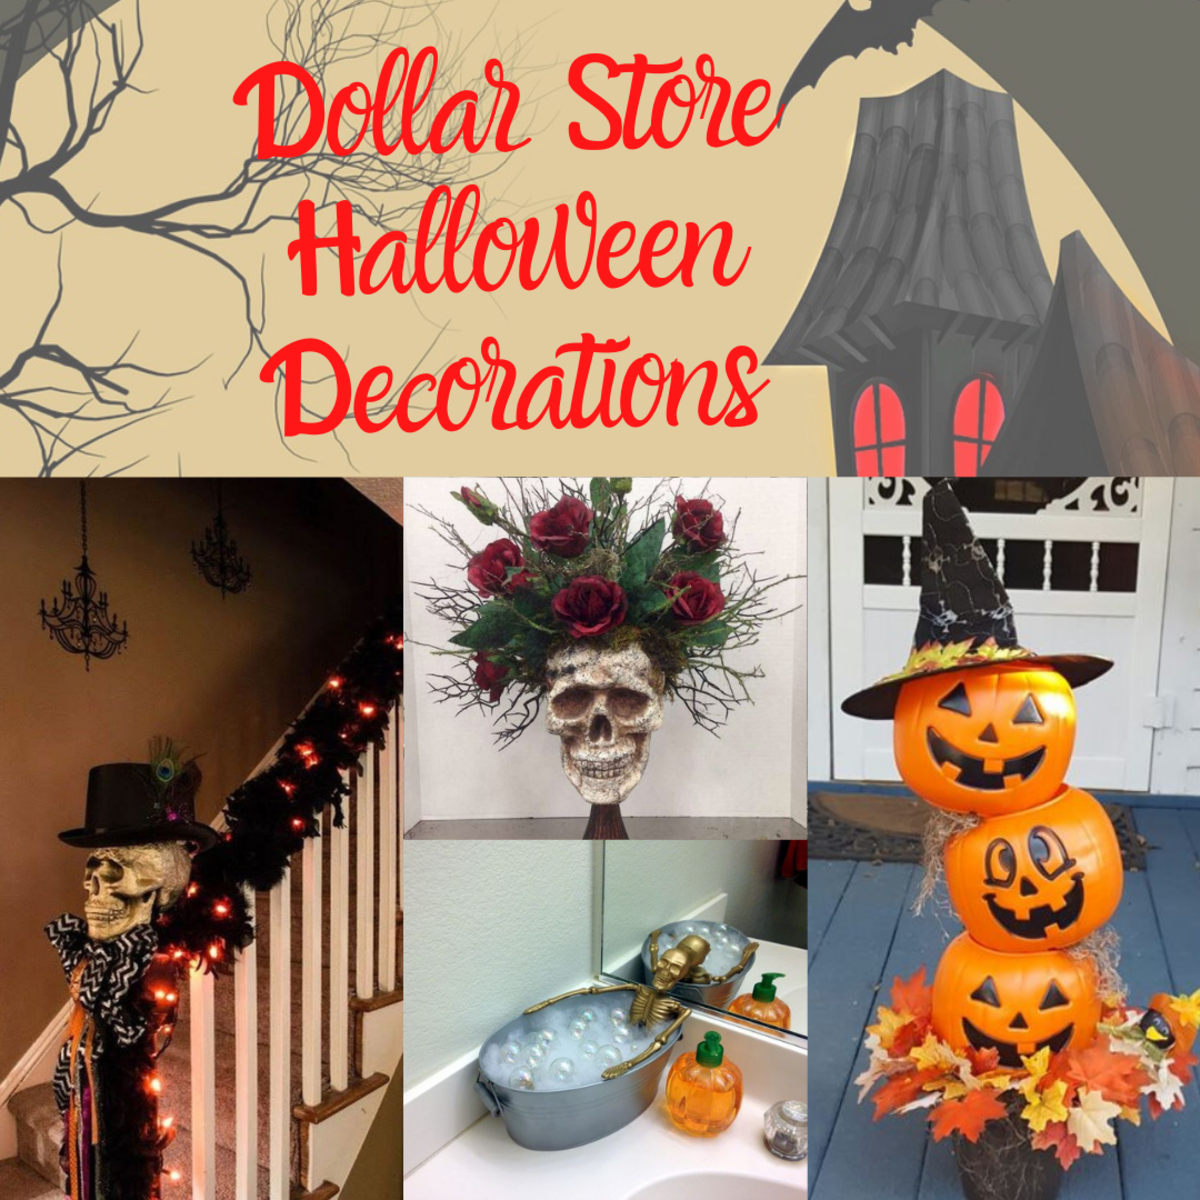 50+ DIY Dollar Store Halloween Decorations To Creep Your Guests Out